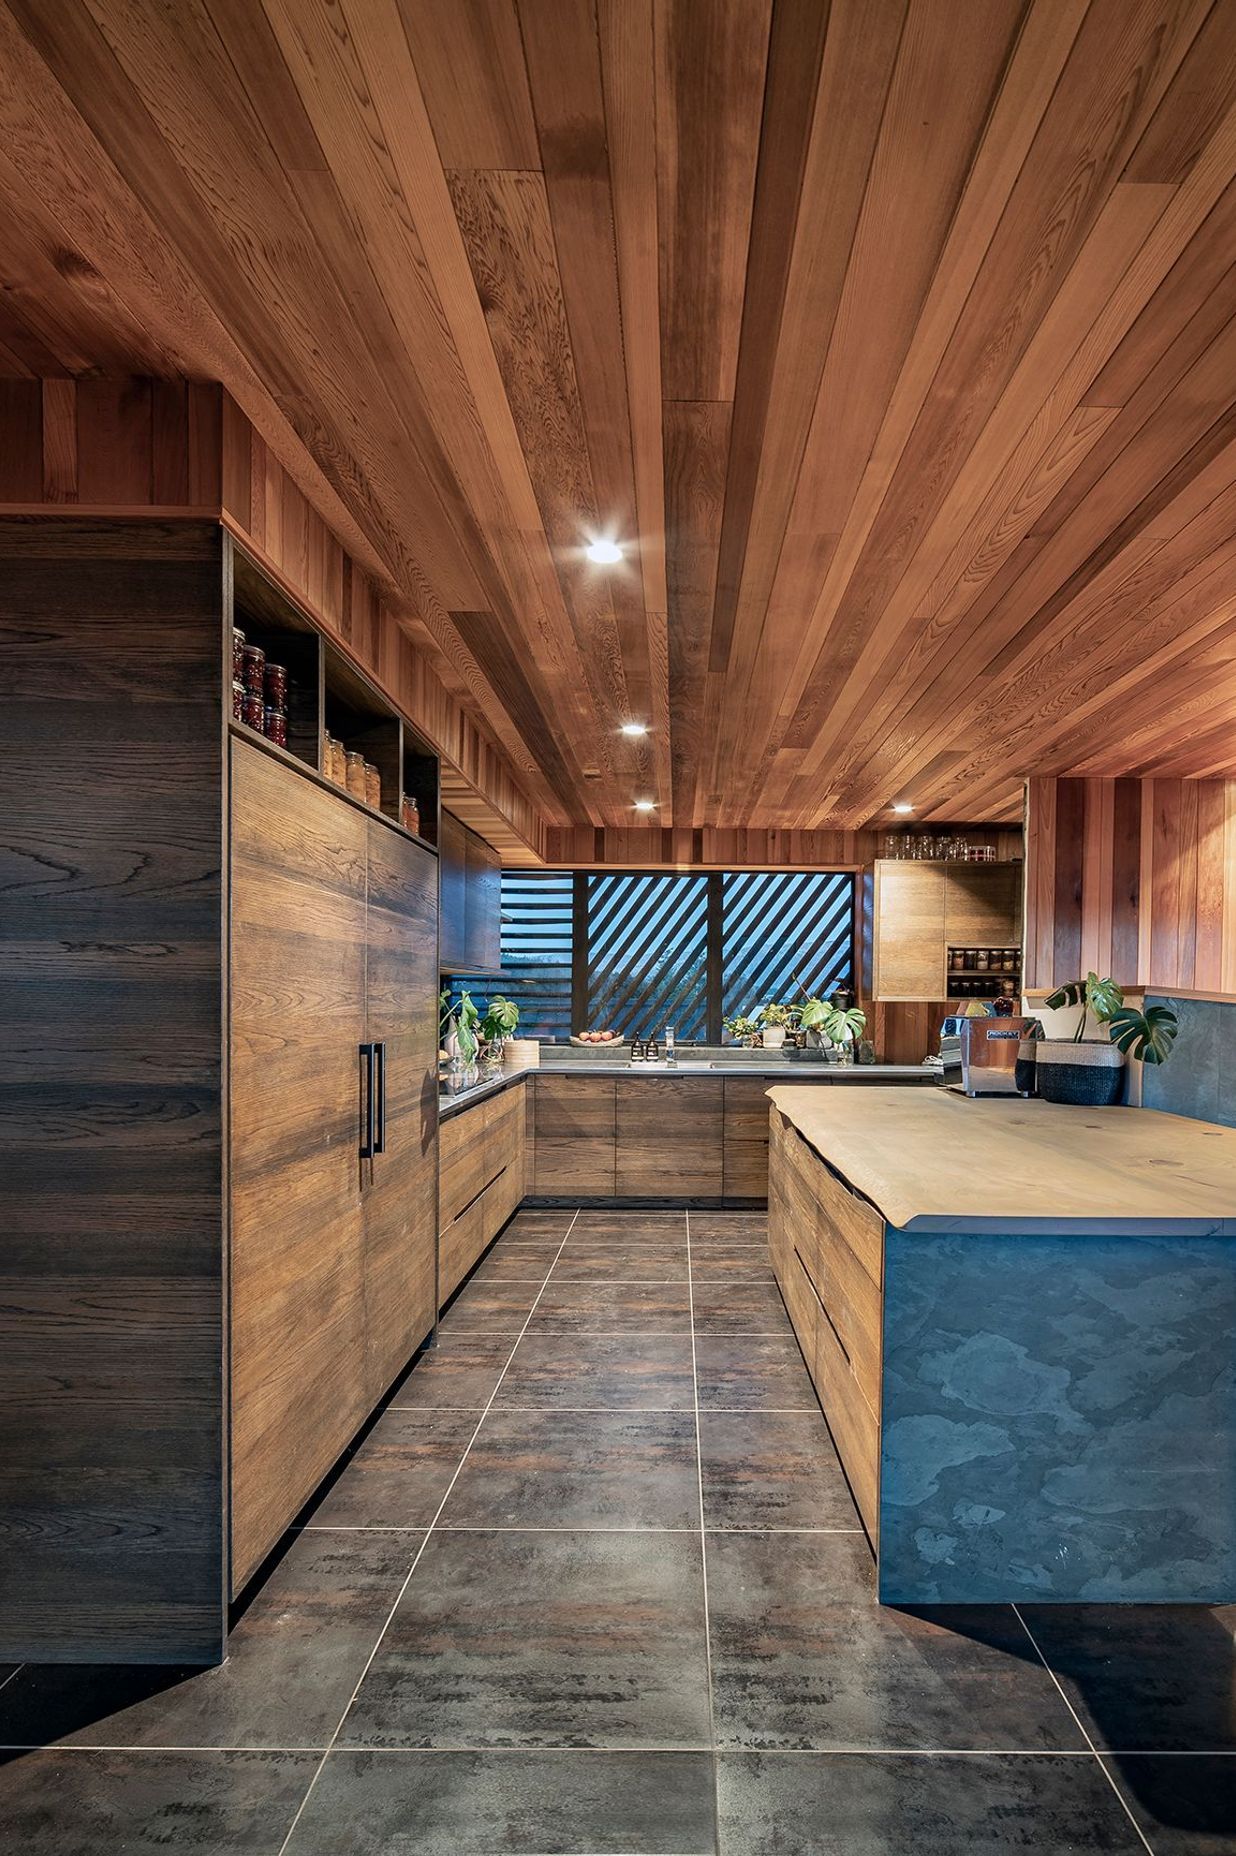 The kitchen is finished with a natural material palette of stone and timber.